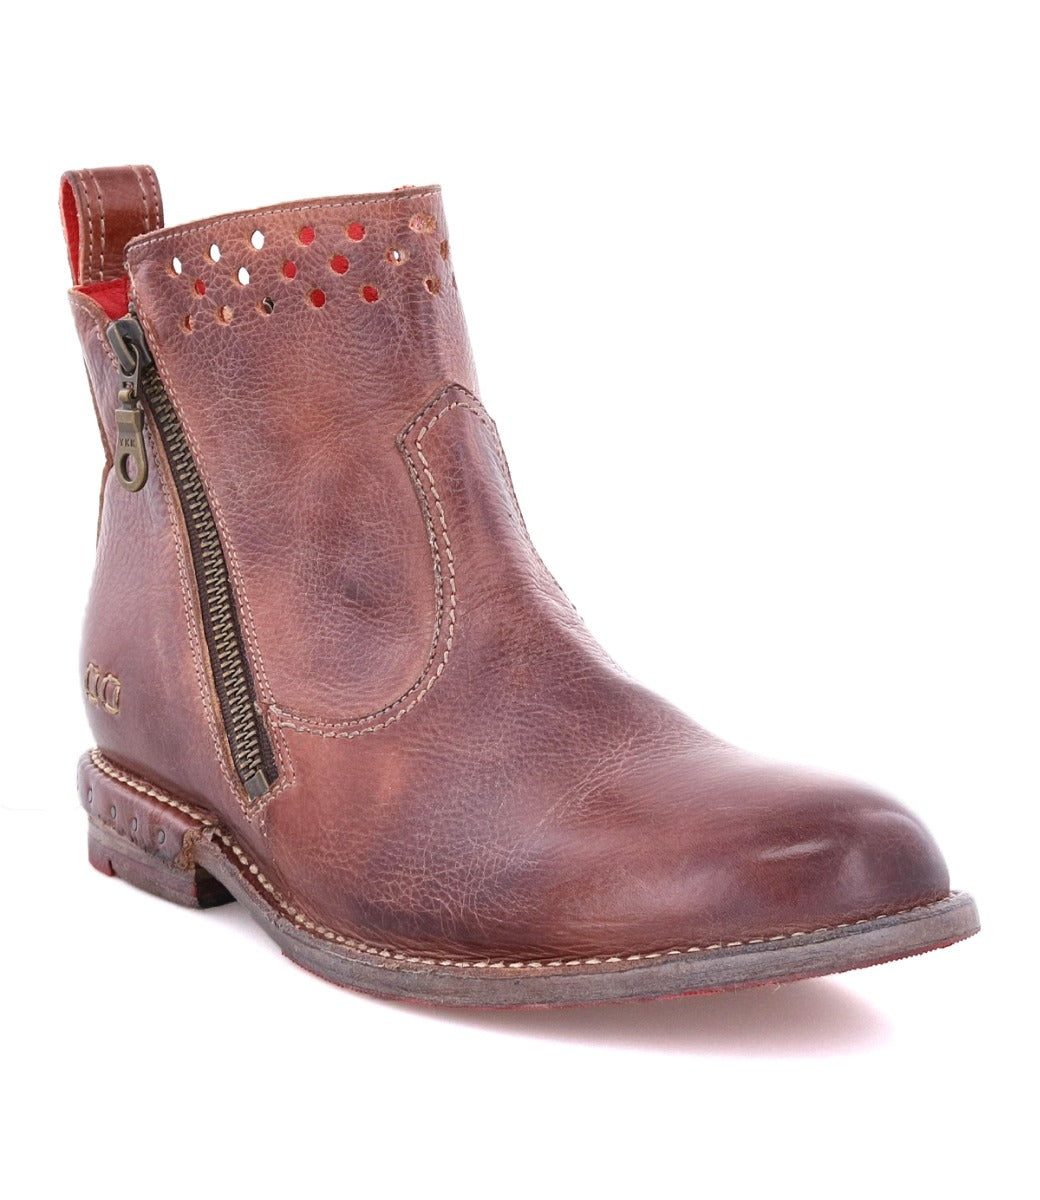 A women's brown ankle boot with red detailing from Bed Stu called Lotus.